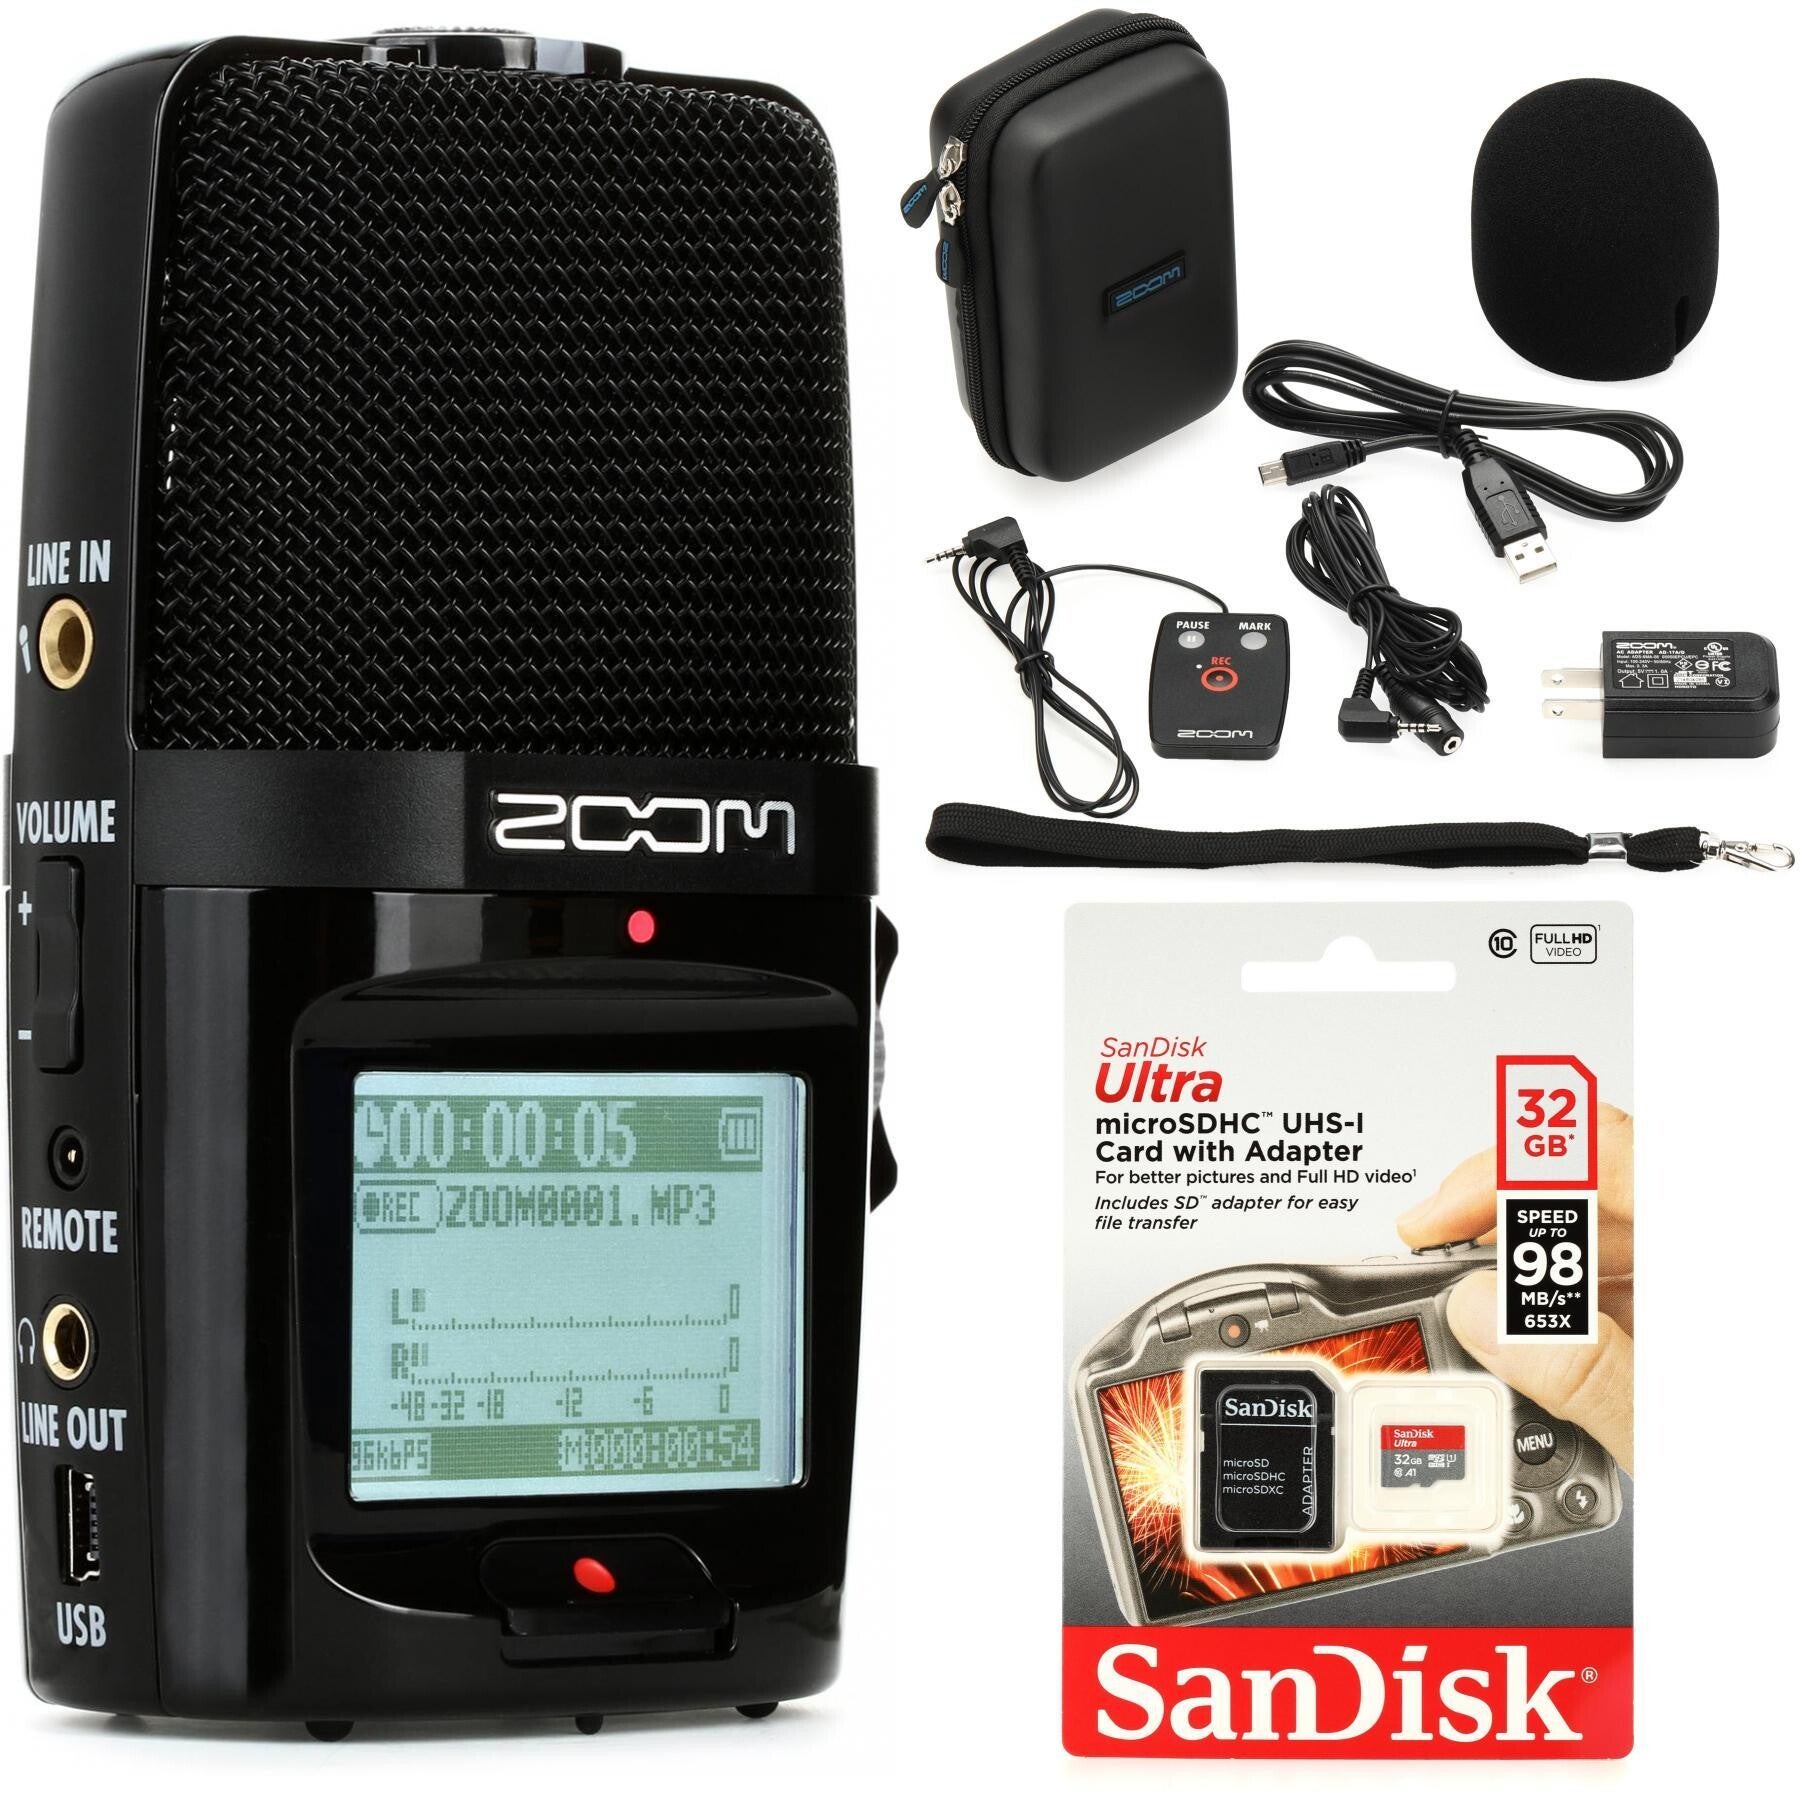 Zoom H1n-VP Value Pack Portable Recorder with Accessories